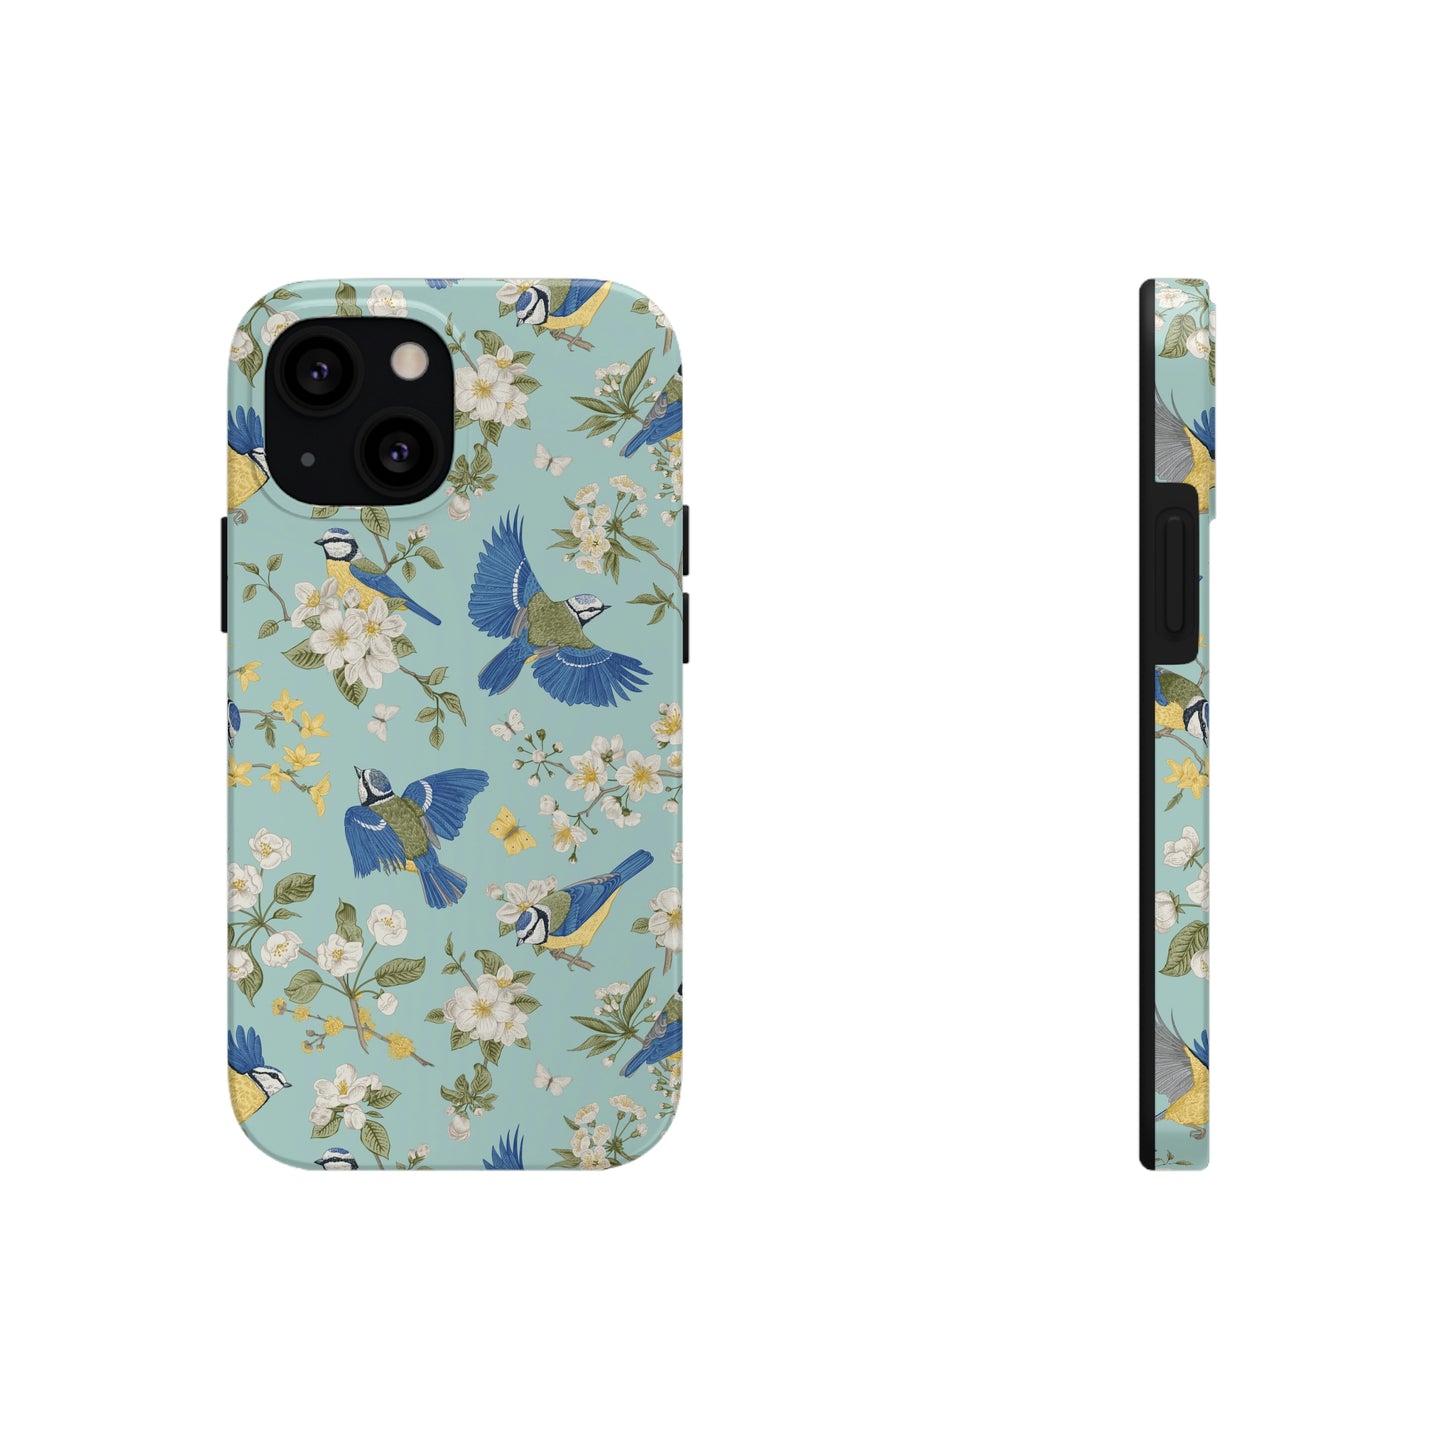 Chnoiserie Birds and Flowers Phone Case